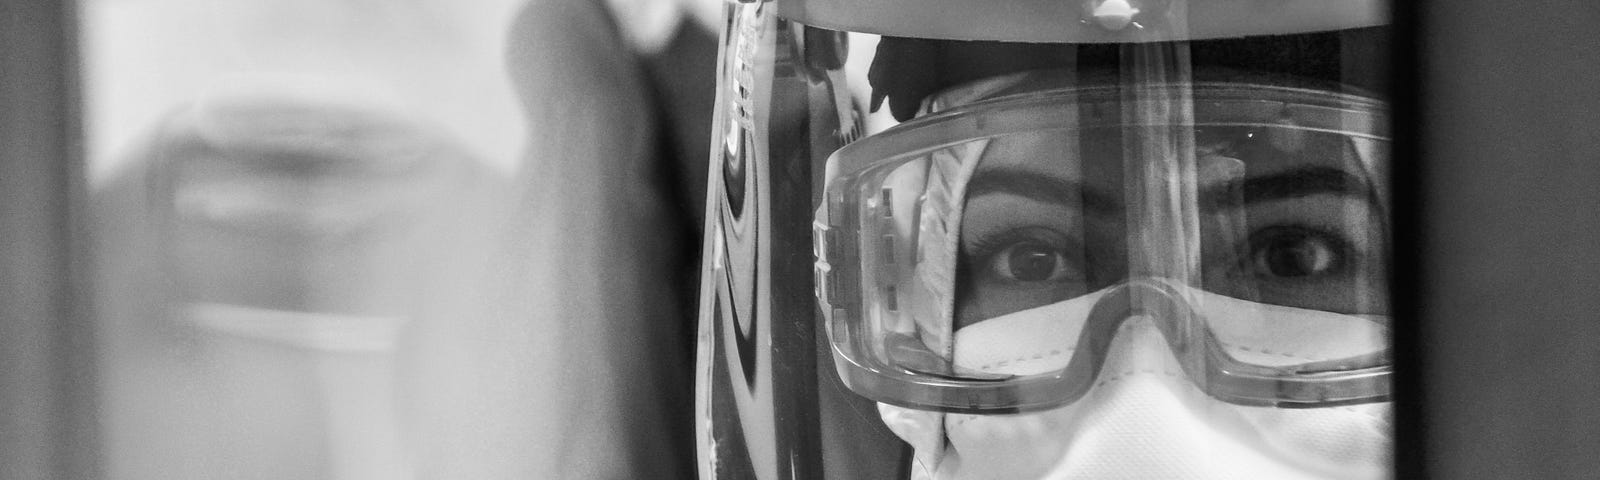 A healthcare worker in full protective gear, including a face shield, goggles, and a mask, looks through a window or screen with a focused and serious expression. The image is in black and white, highlighting the reflective surfaces and the clarity of the worker’s eyes.